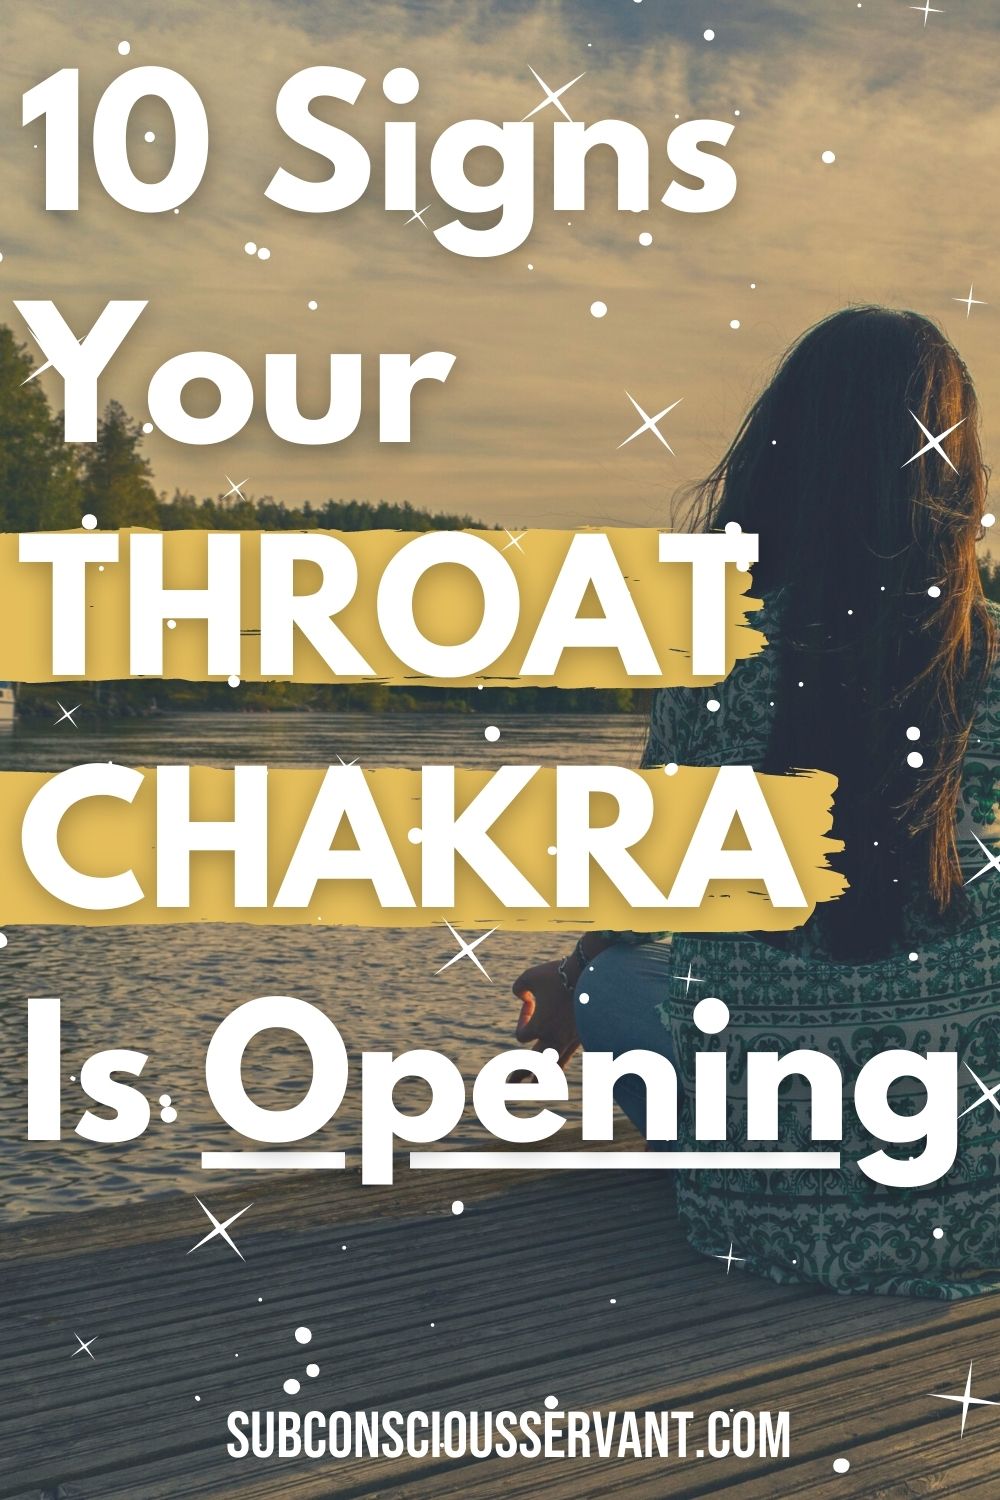 10 Signs Your Throat Chakra Is Opening